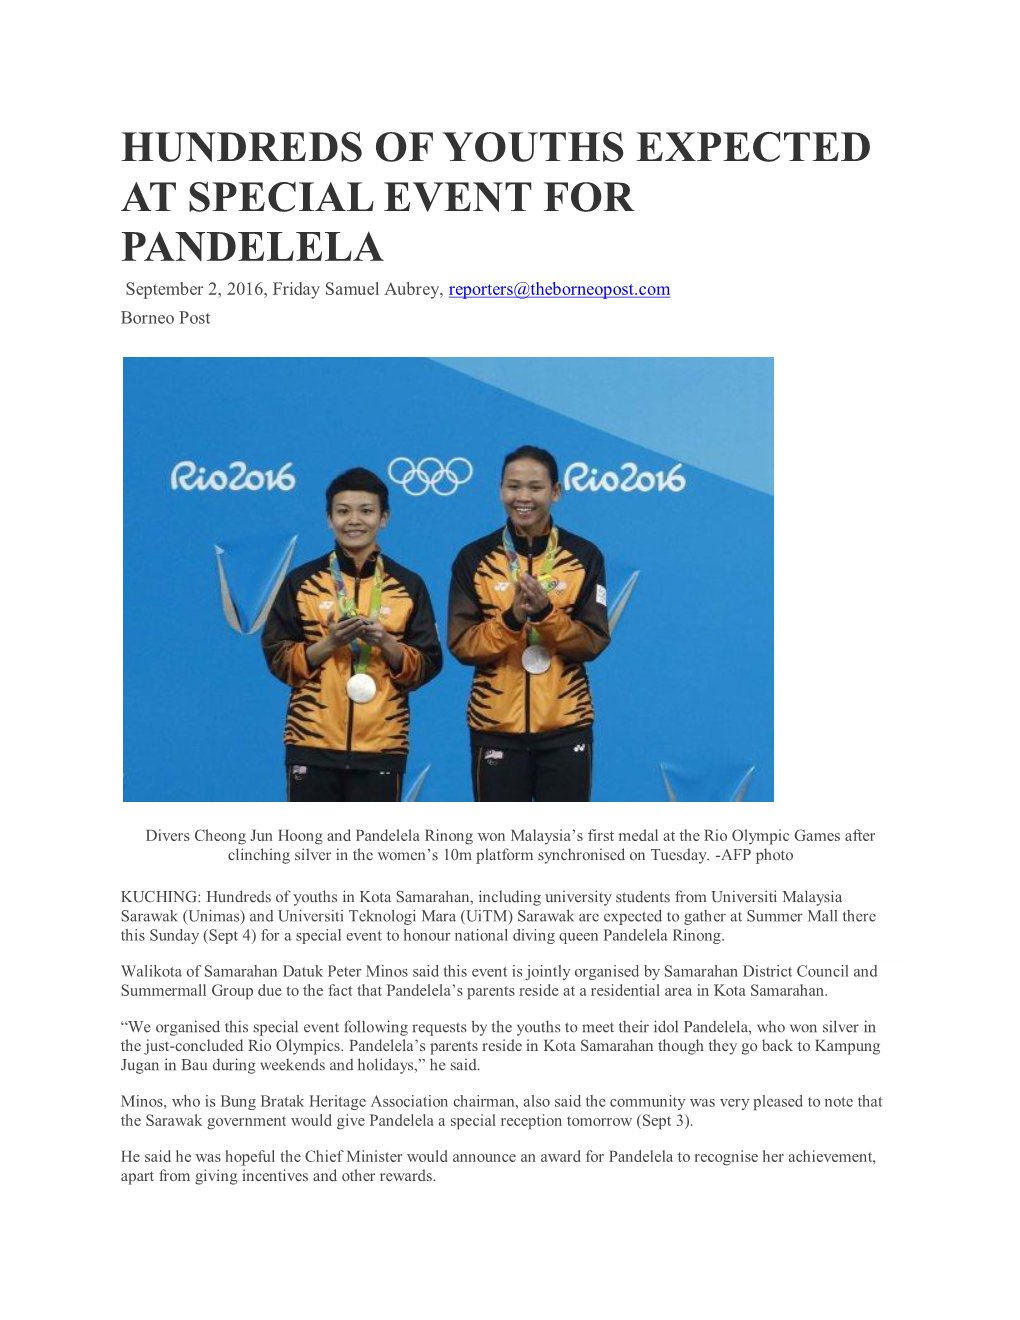 HUNDREDS of YOUTHS EXPECTED at SPECIAL EVENT for PANDELELA September 2, 2016, Friday Samuel Aubrey, Reporters@Theborneopost.Com Borneo Post